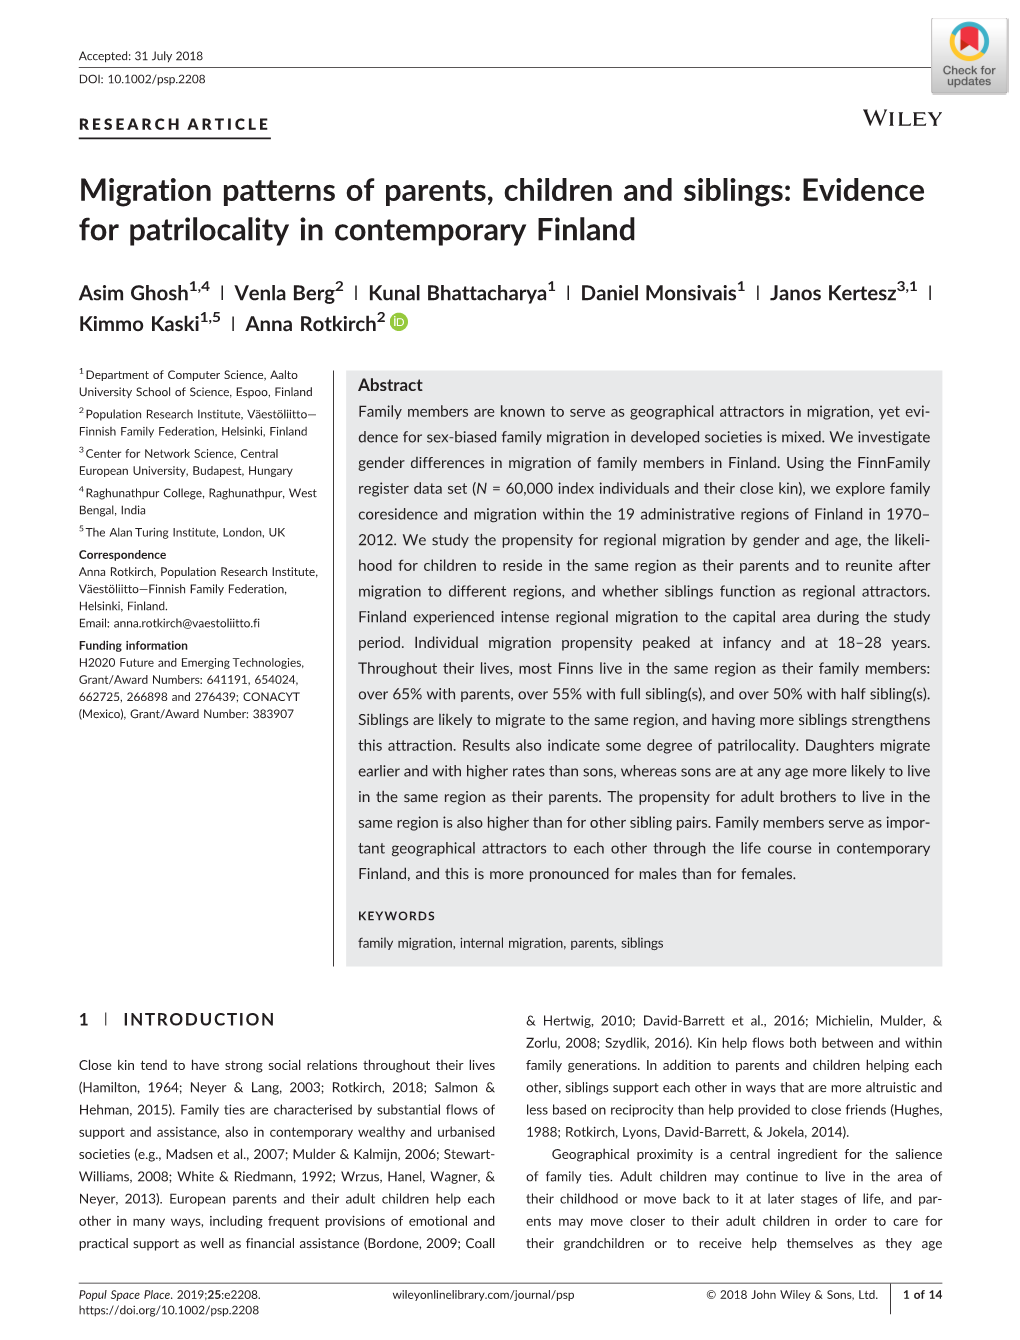 Migration Patterns of Parents, Children and Siblings: Evidence for Patrilocality in Contemporary Finland